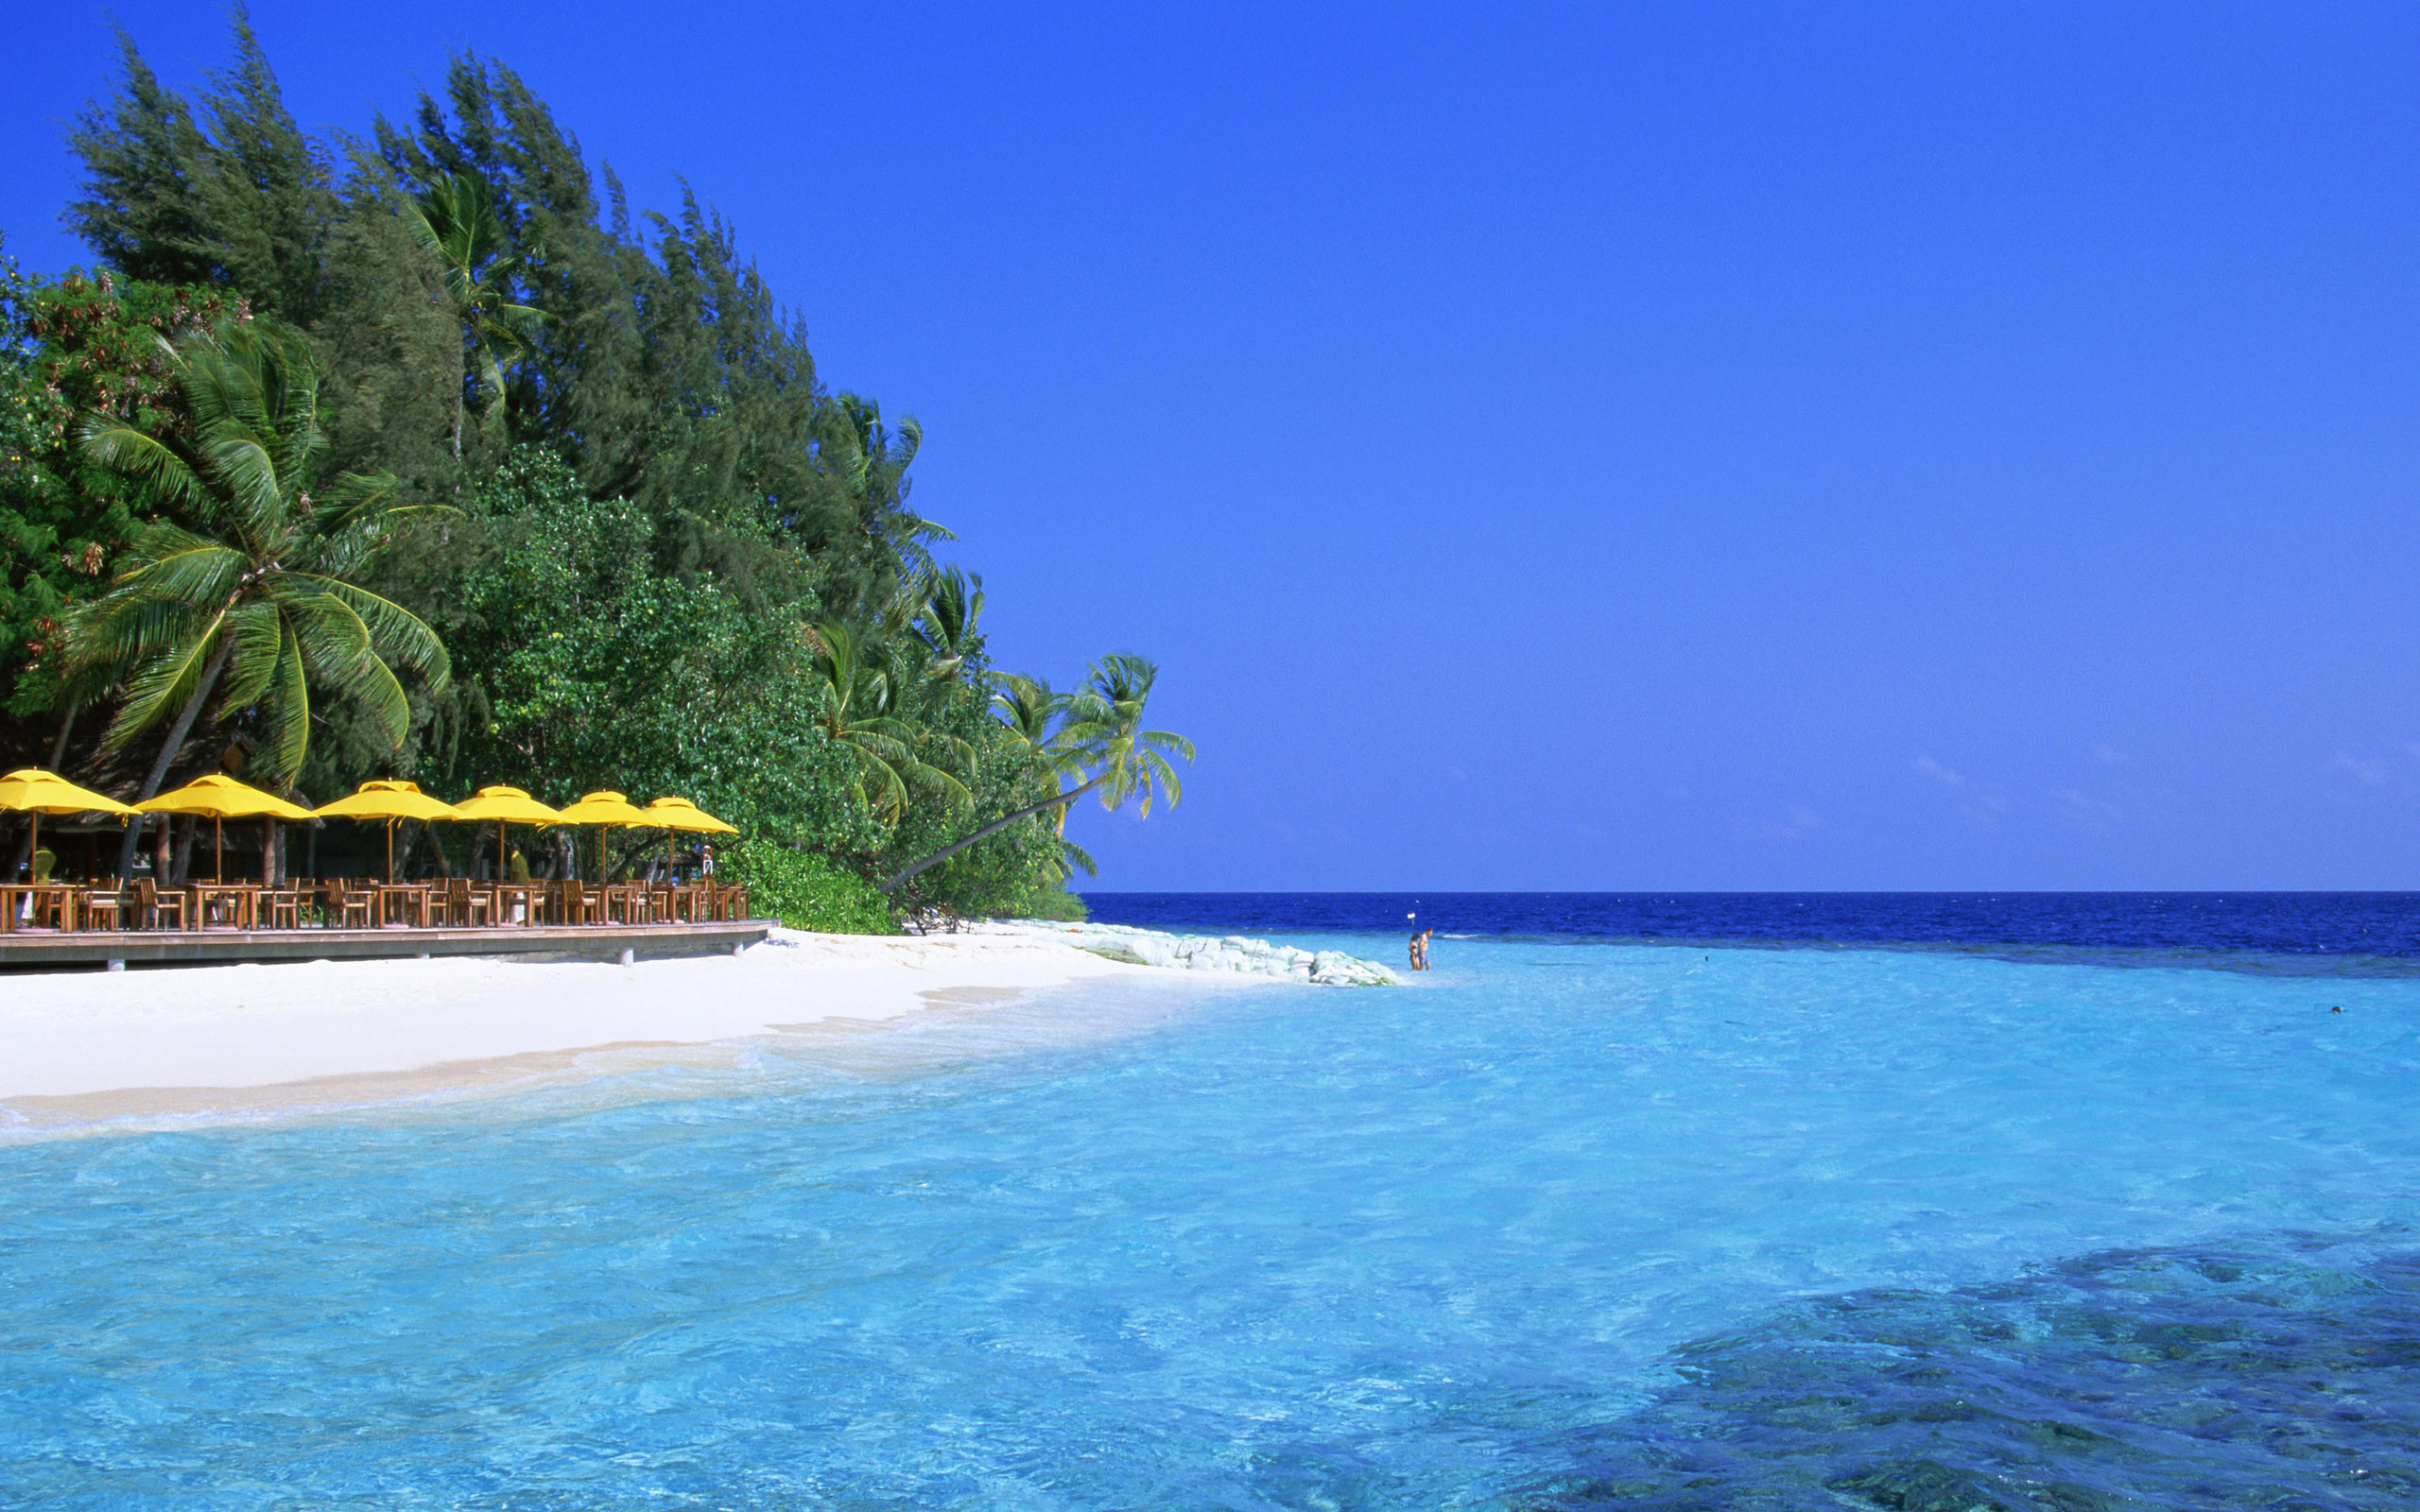 2560x1600 Blue Water Beach Wallpapers | HD Wallpapers